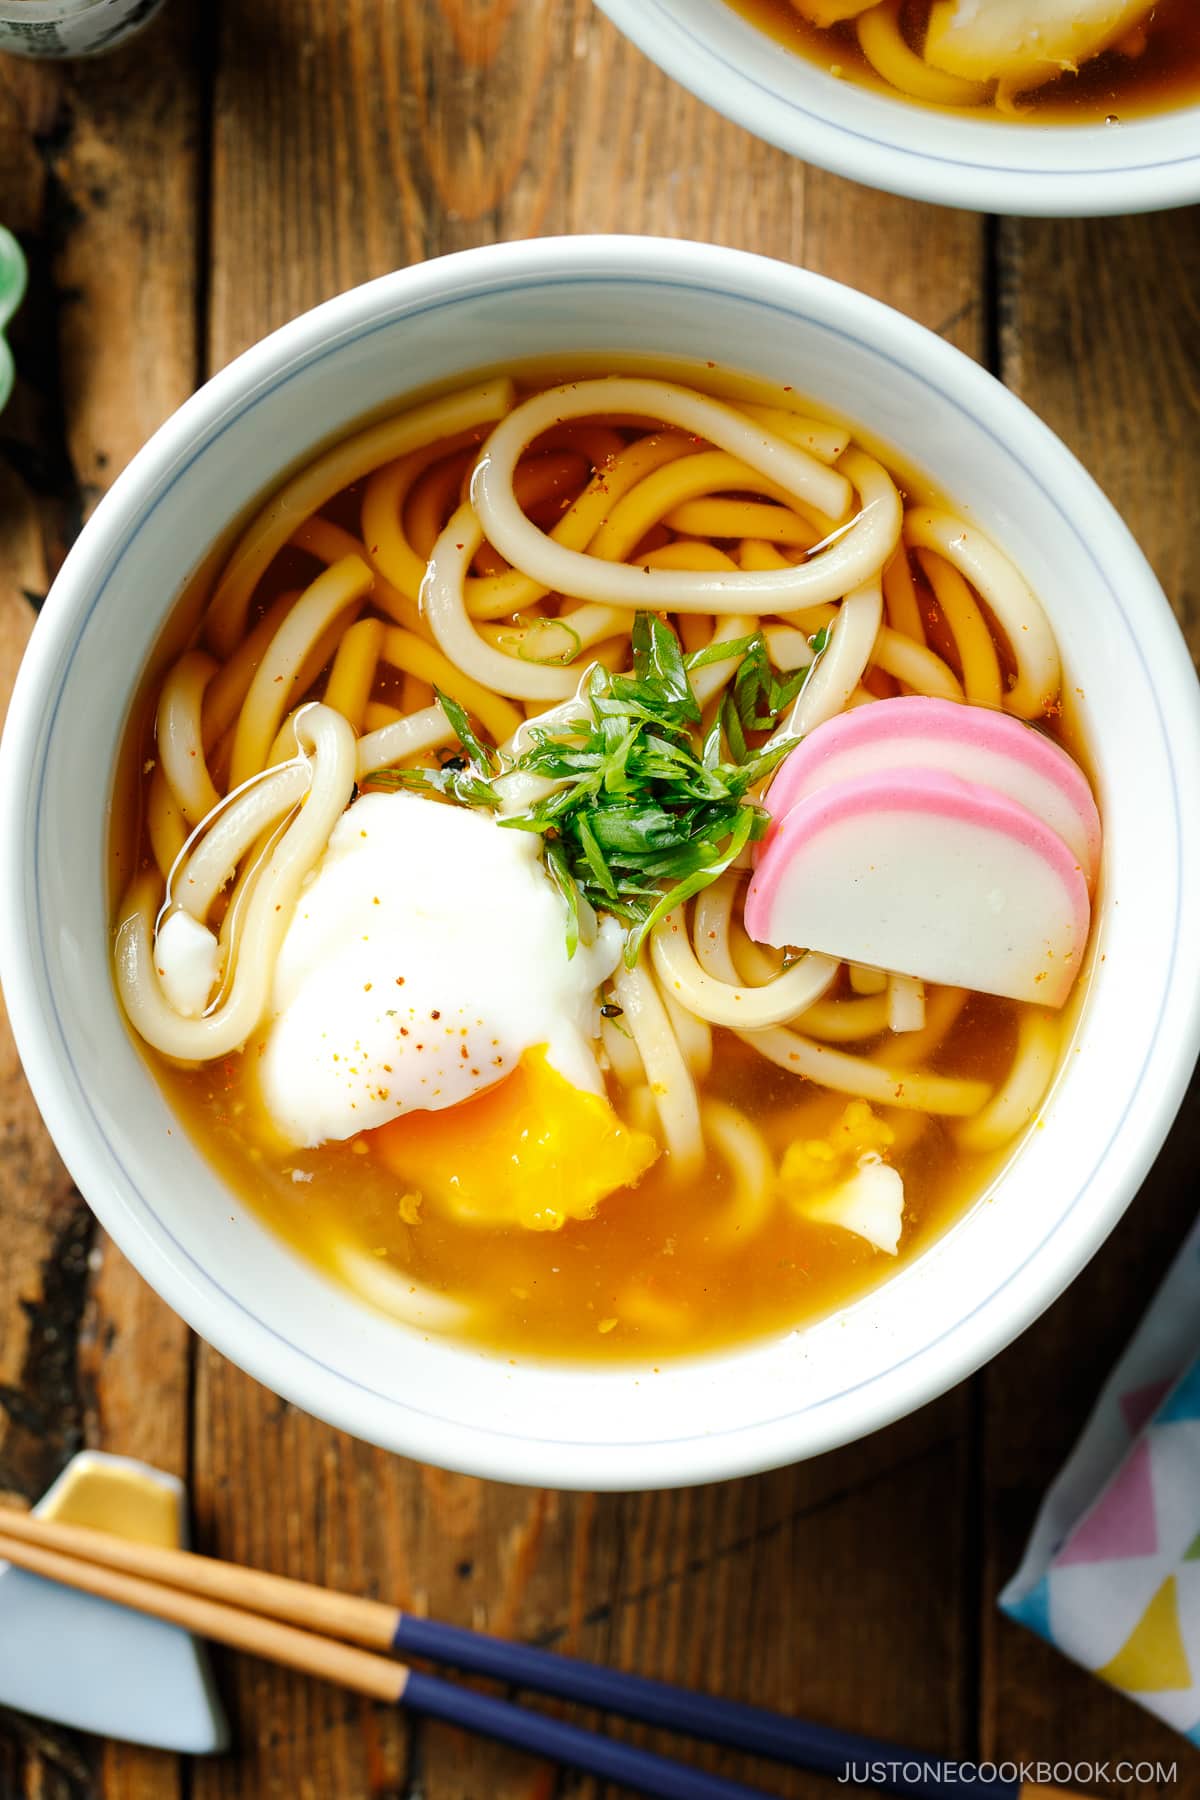 Japanese bowls containing Classic Udon Noodle Soup called Kake Udon or Su Udon, topped with sliced green onion, onsen tamago (poached egg), and fish cake slices.